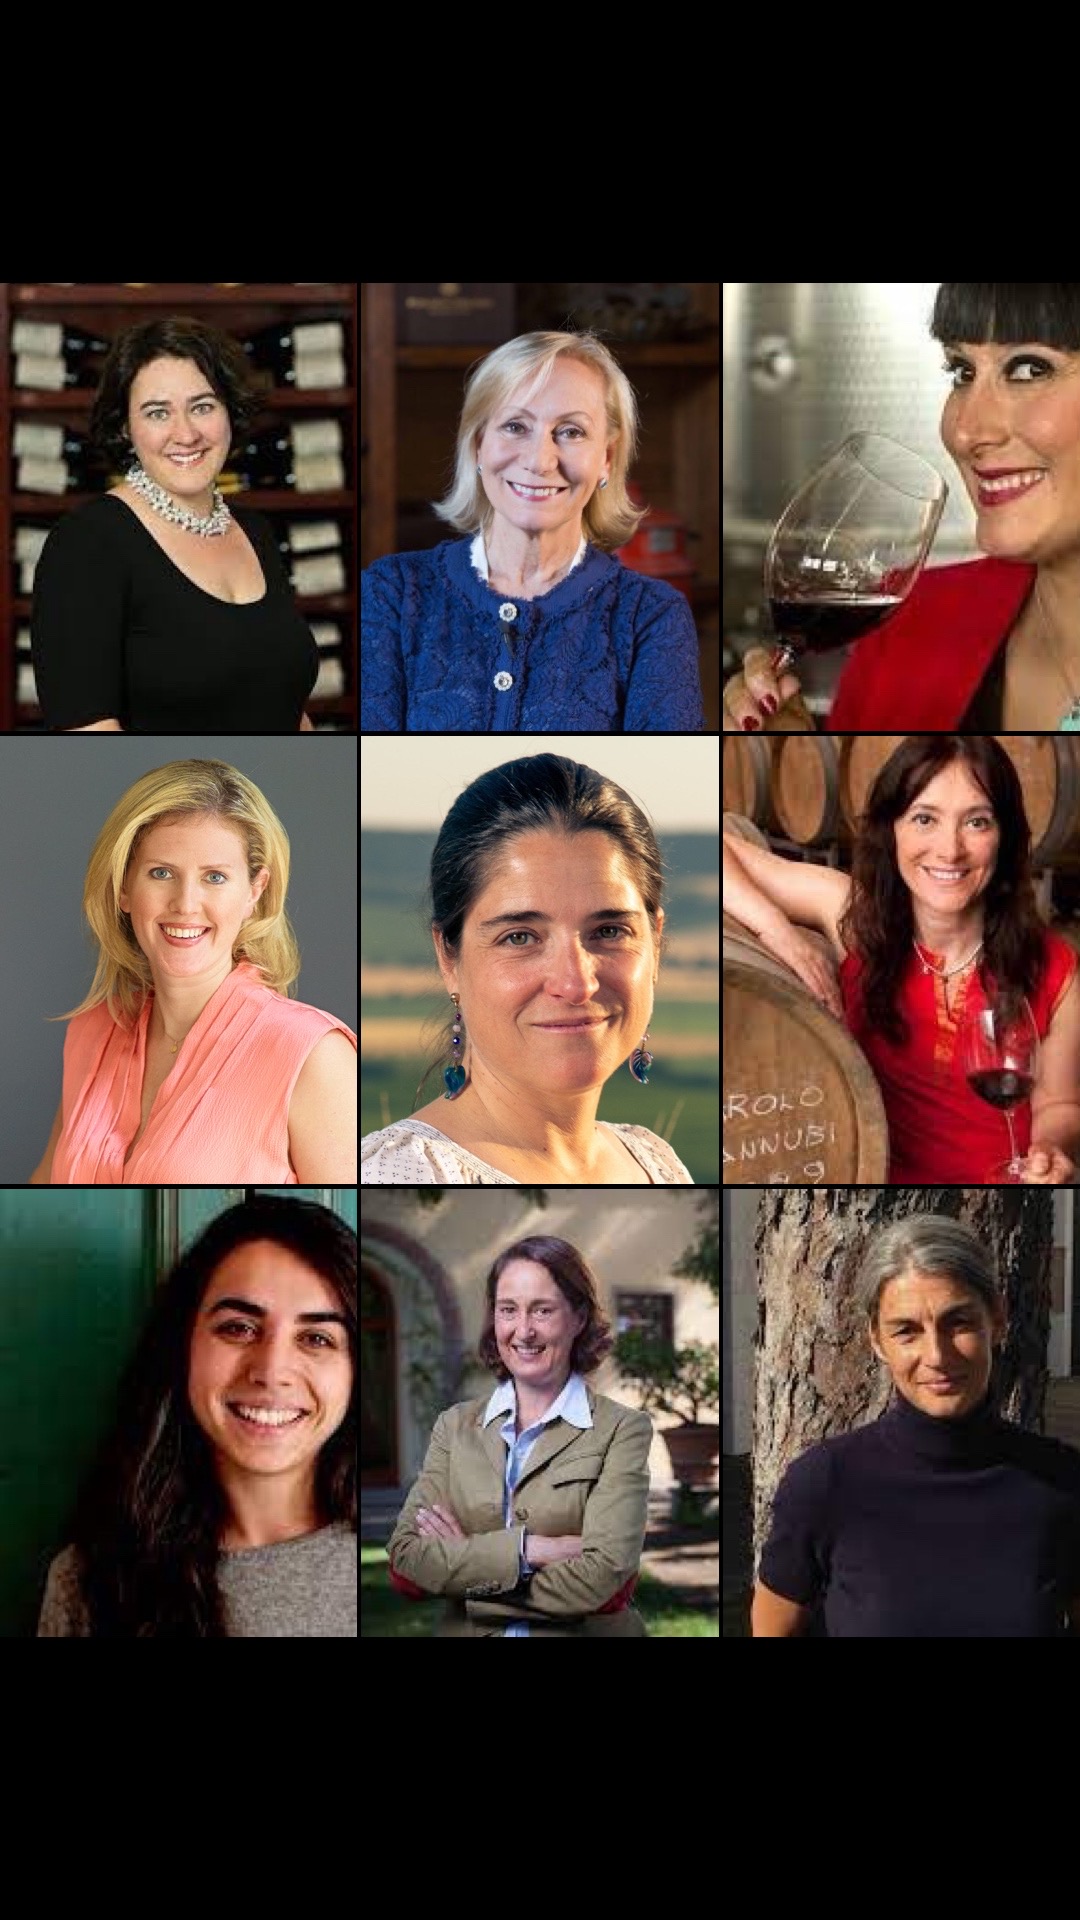 A Unique “Women Wine Event” will be held for the first time at Vinitaly April 10th